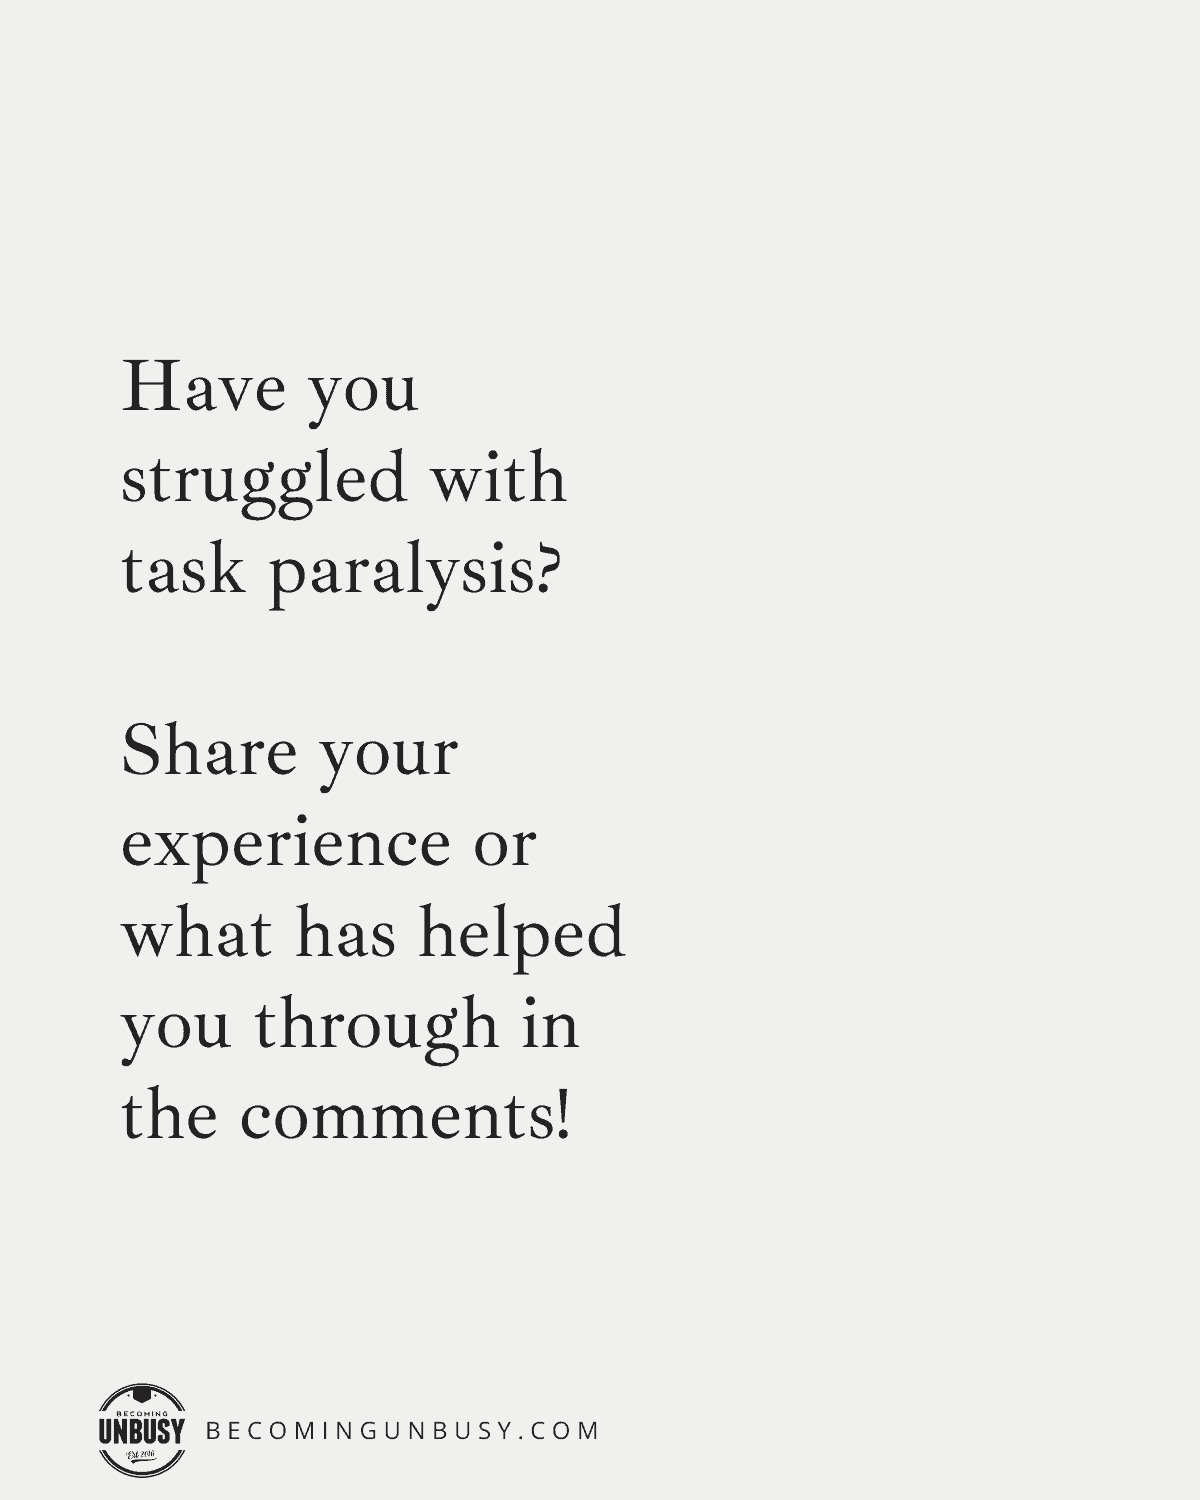 Have you struggled with task paralysis?

Share your experience or what has helped you through in the comments!